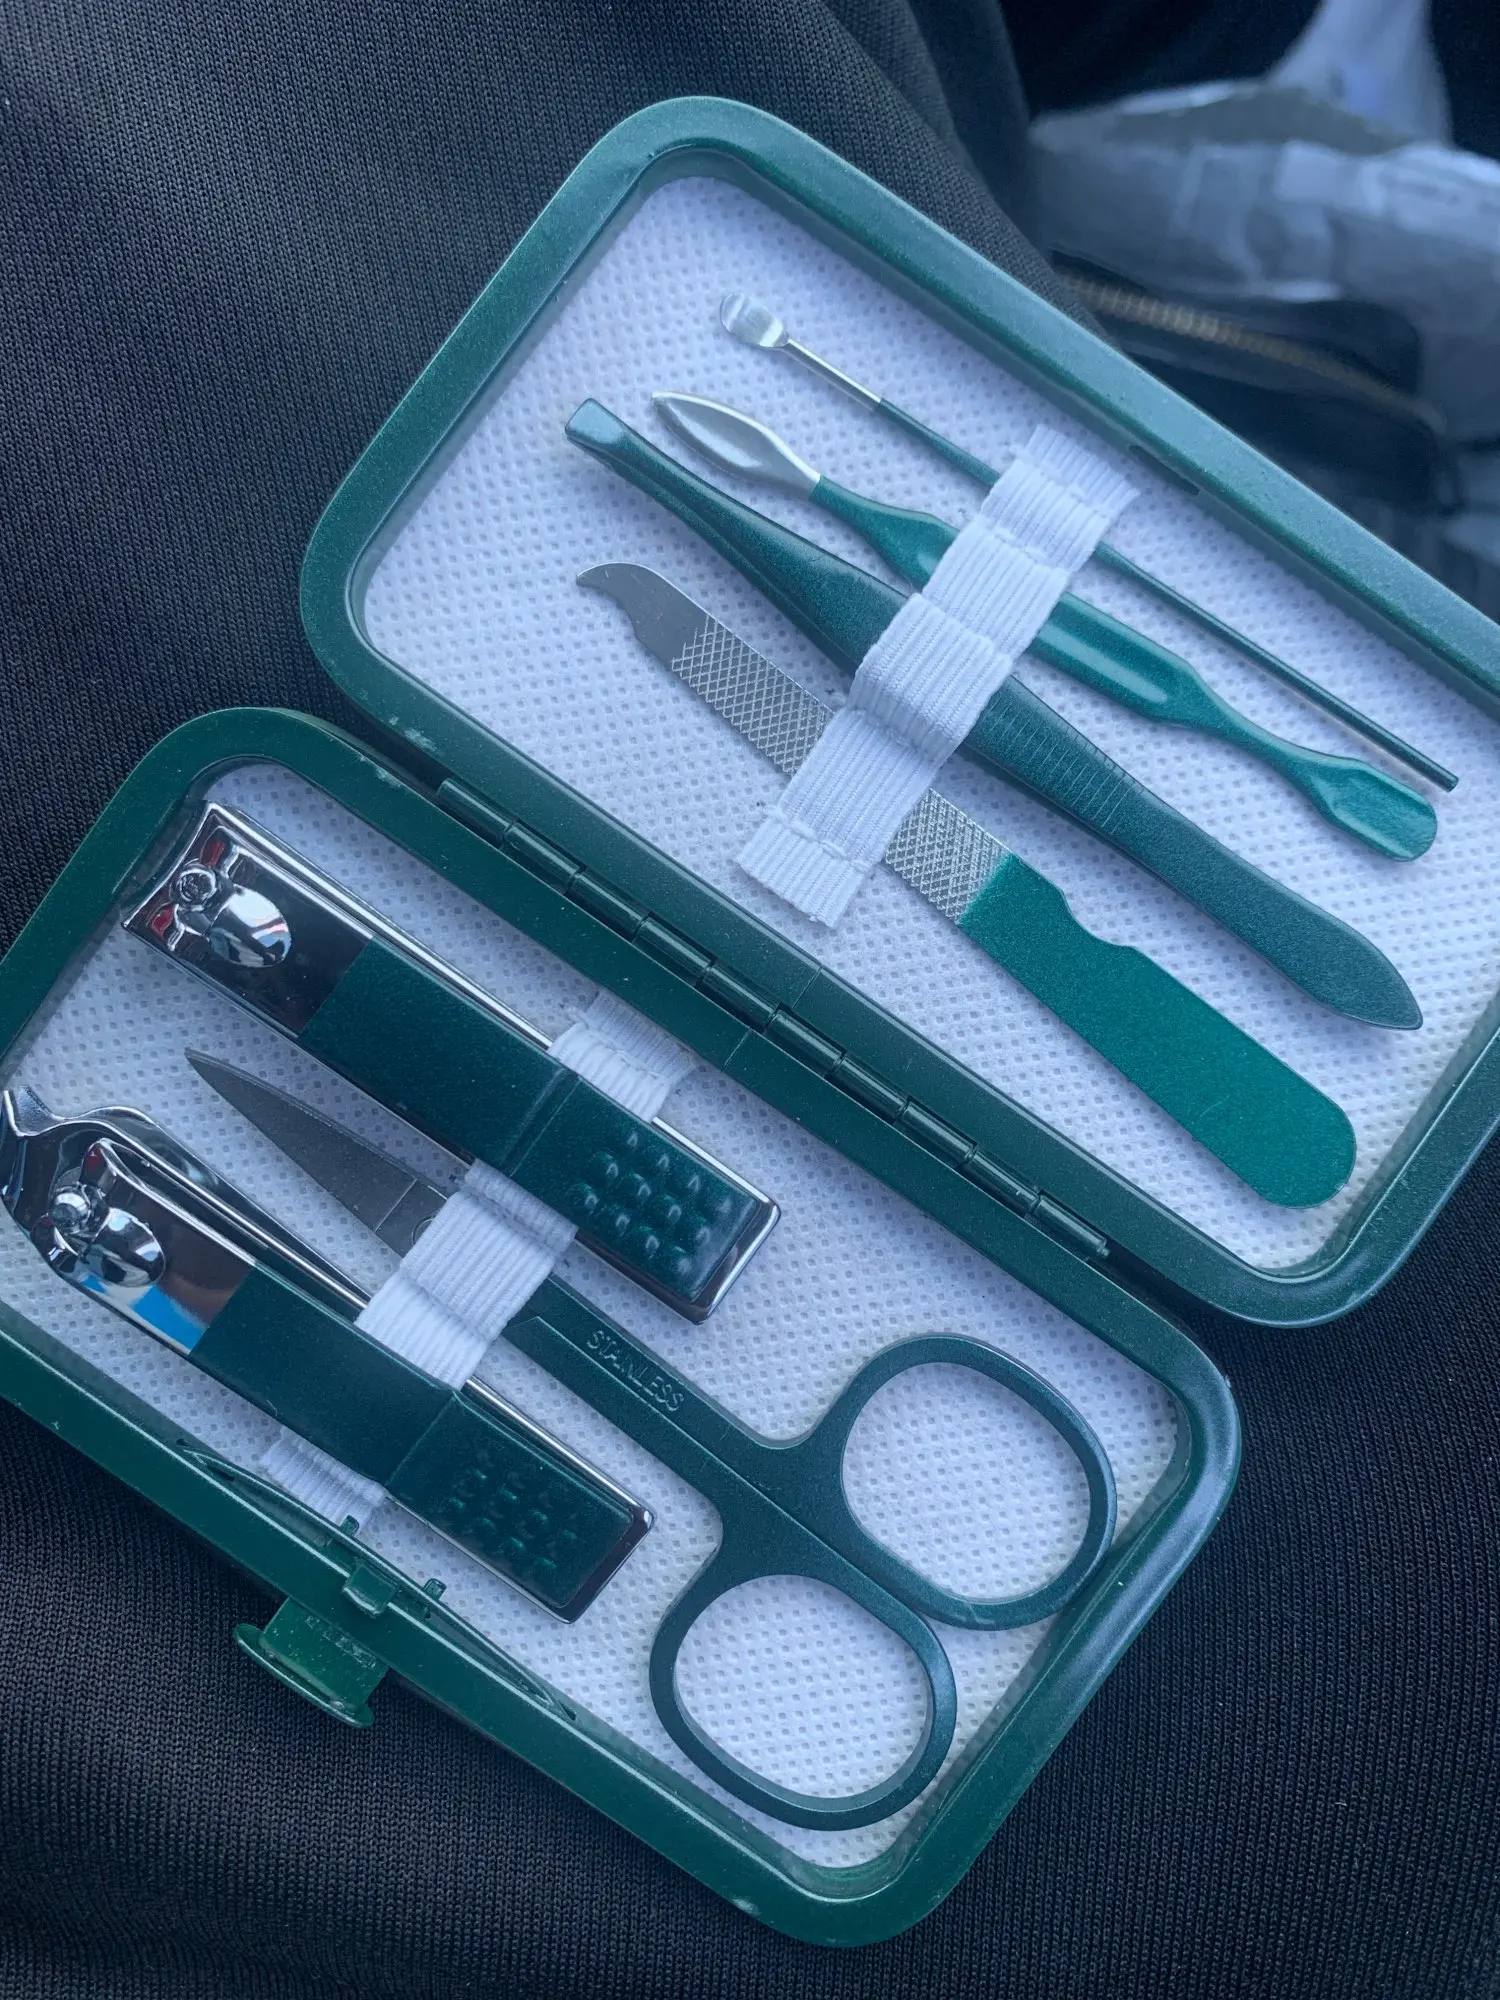 Stainless Steel Nail Clipper Set Grooming Tool Set With Portable Case Manicure Art Tool Green Nails Cut photo review